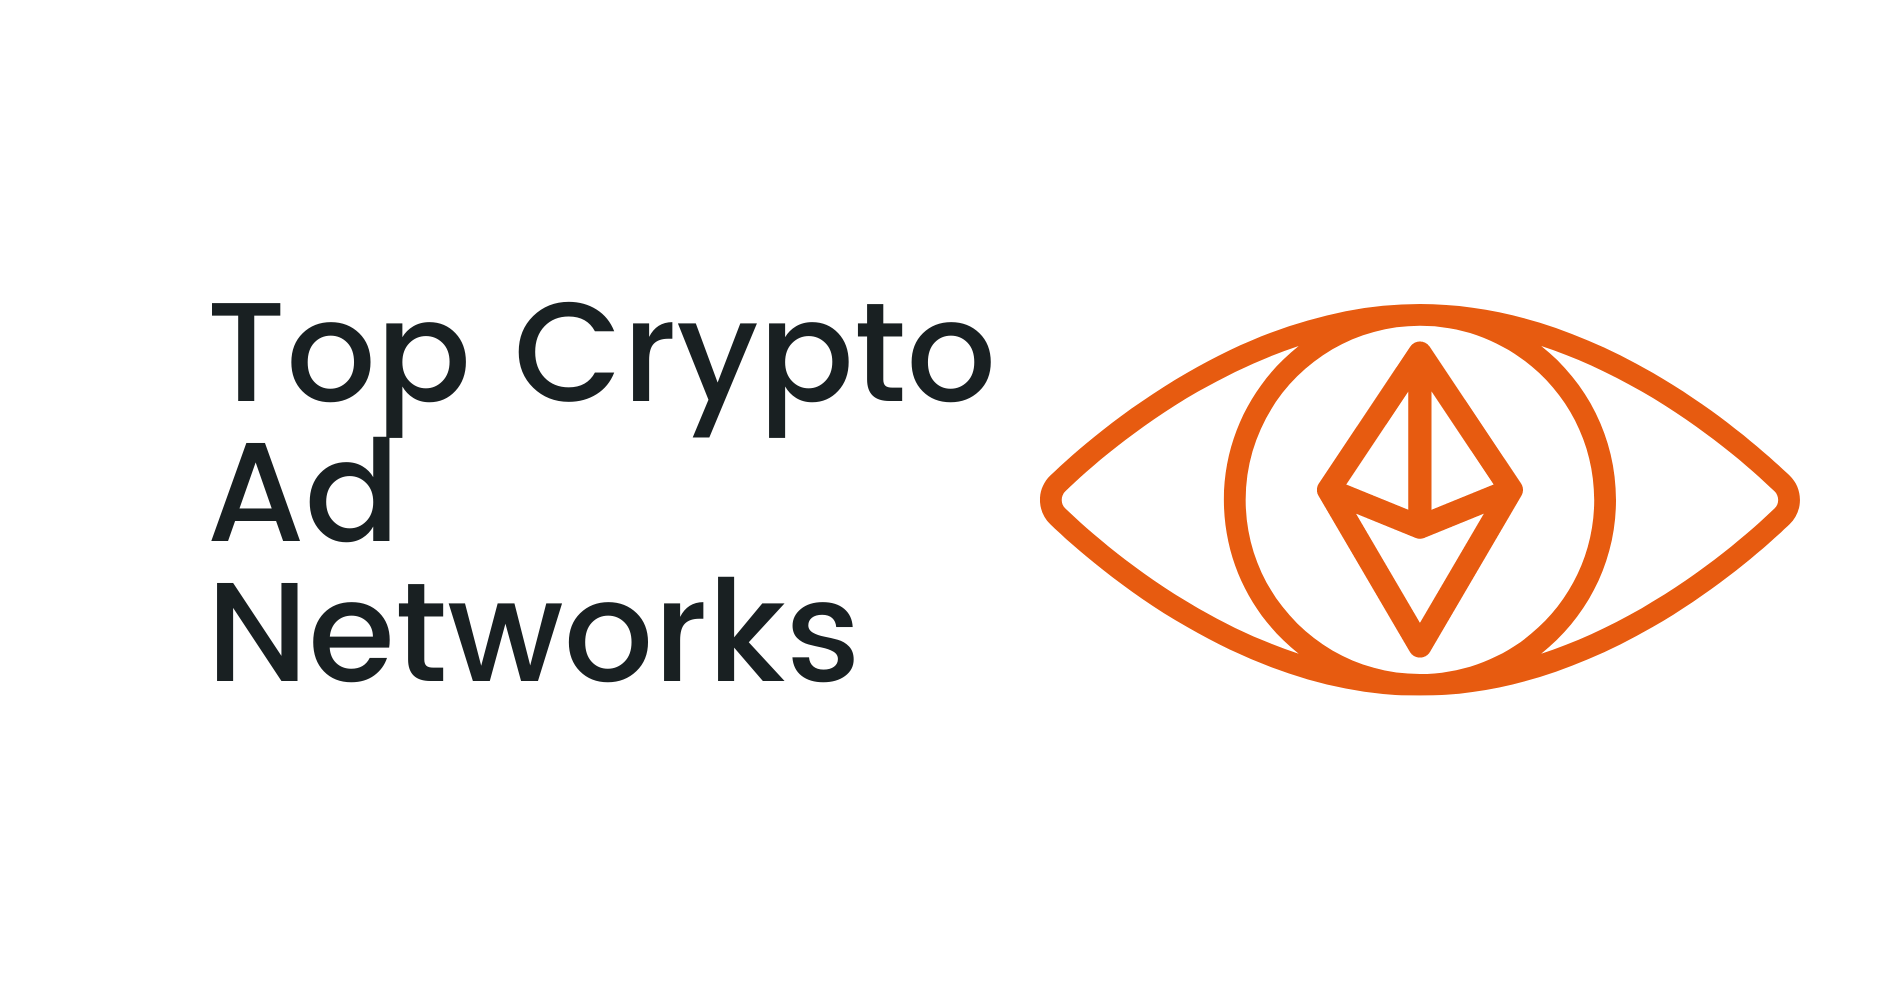 Top Crypto Ad Networks